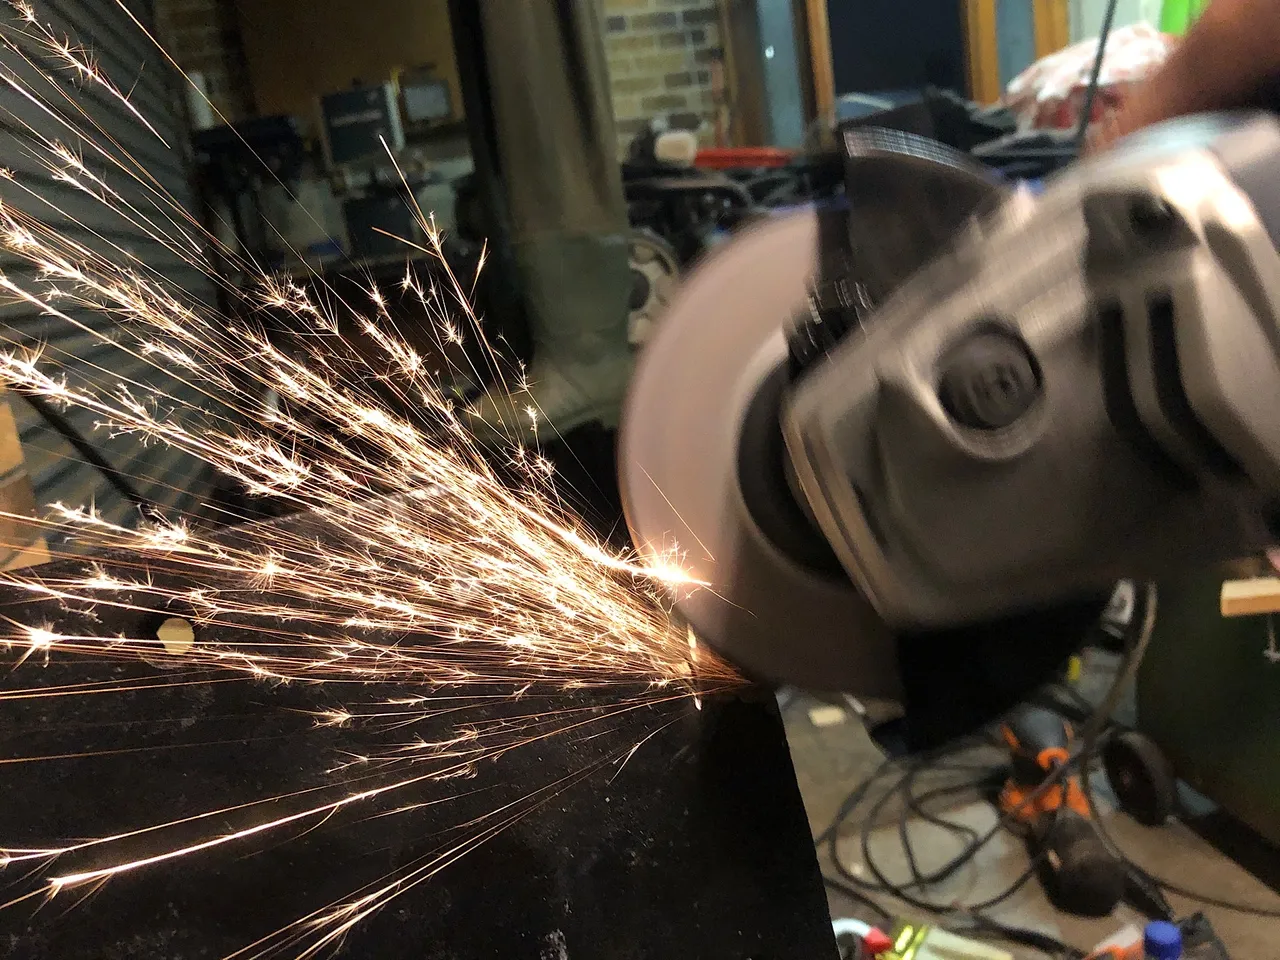 Finishing the cut with an angle grinder